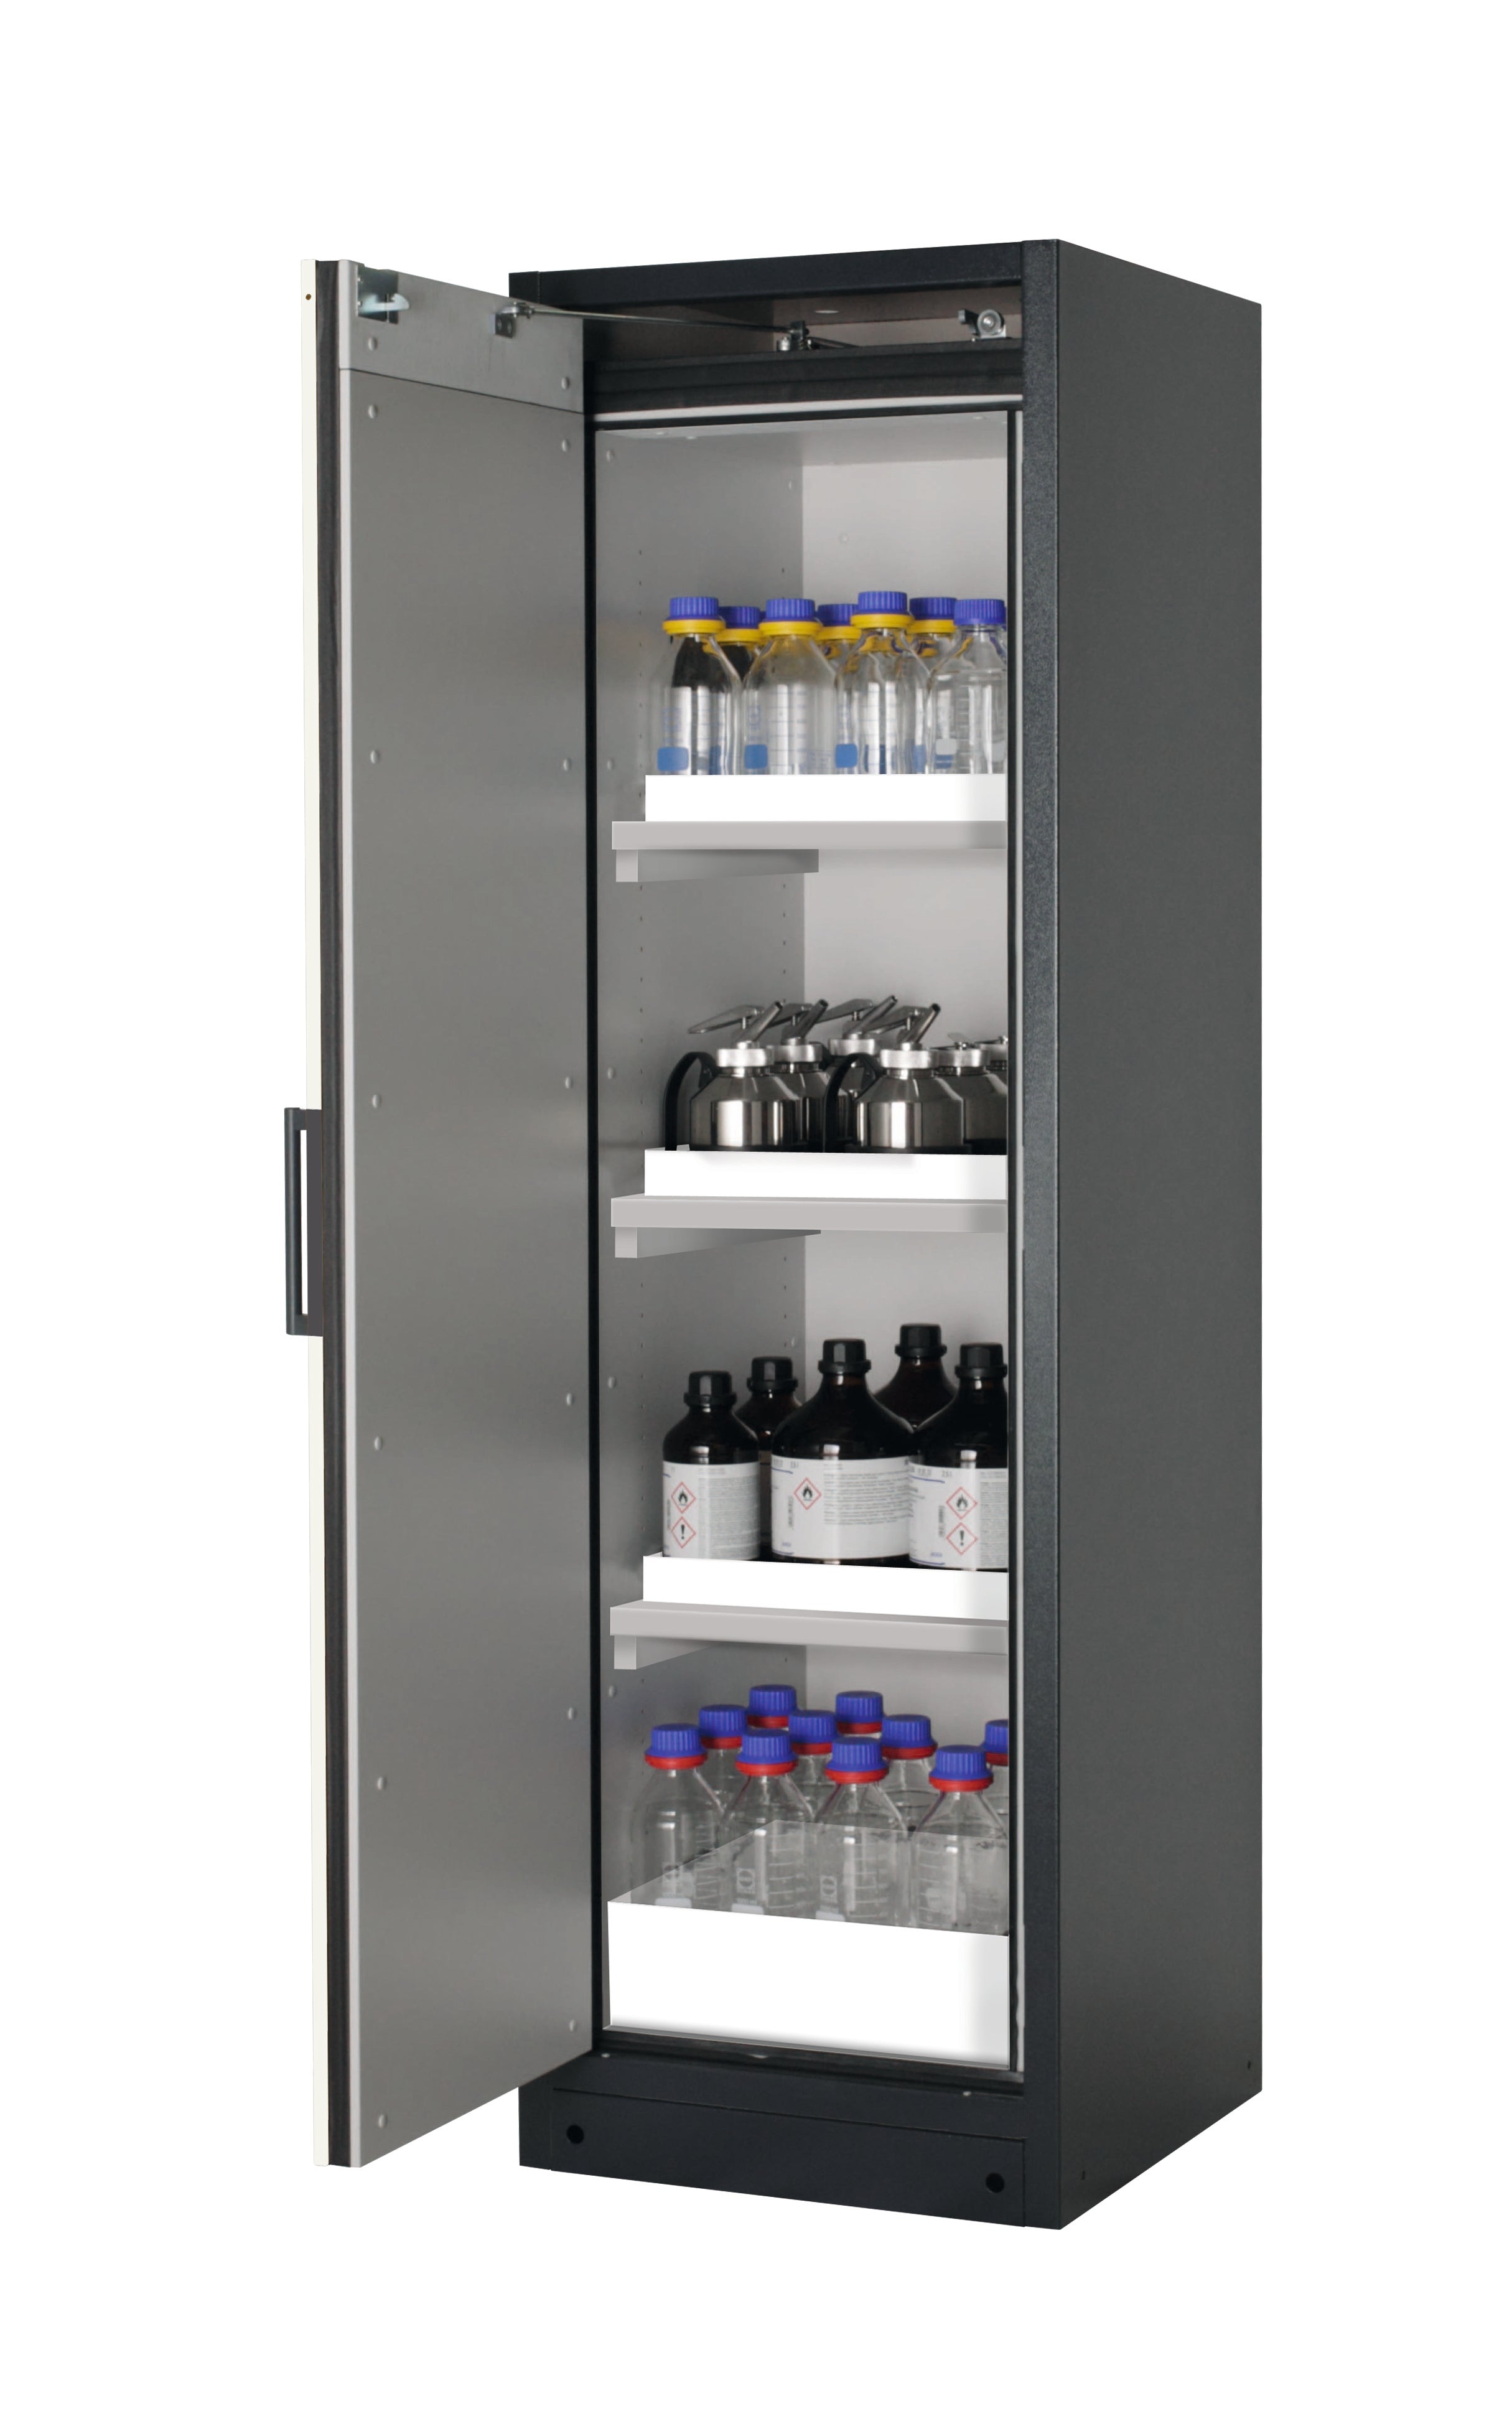 Type 90 safety storage cabinet Q-PEGASUS-90 model Q90.195.060.WDAC in asecos silver with 3x tray shelf (standard) (polypropylene),